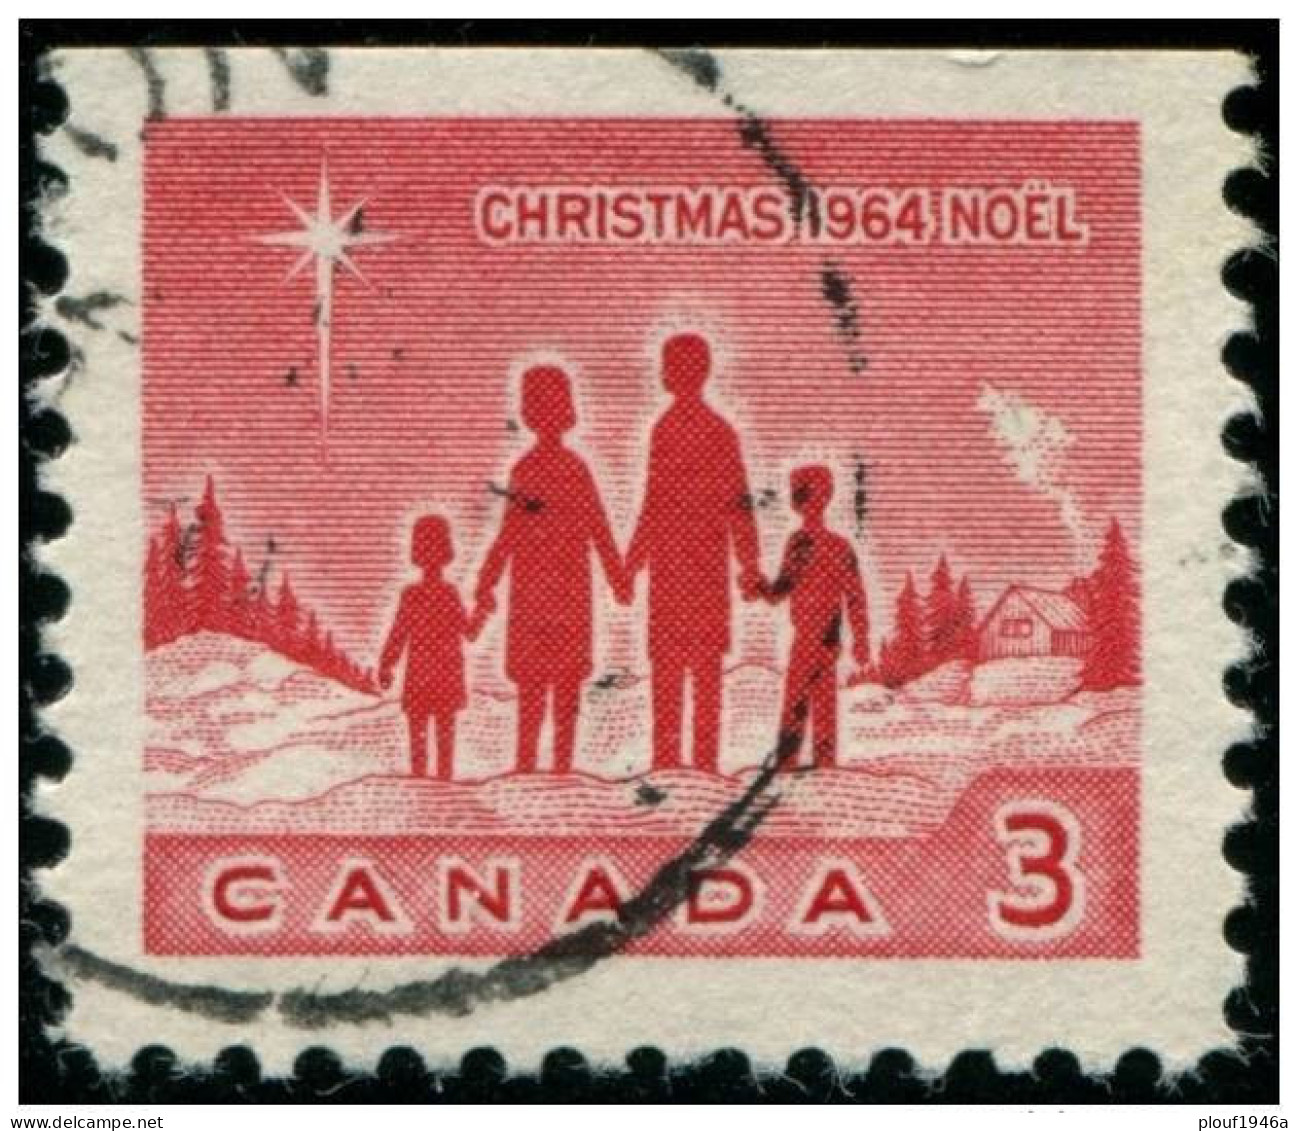 Pays :  84,1 (Canada : Dominion)  Yvert Et Tellier N° :   359-1 (o) / Michel 379-Exo - Single Stamps